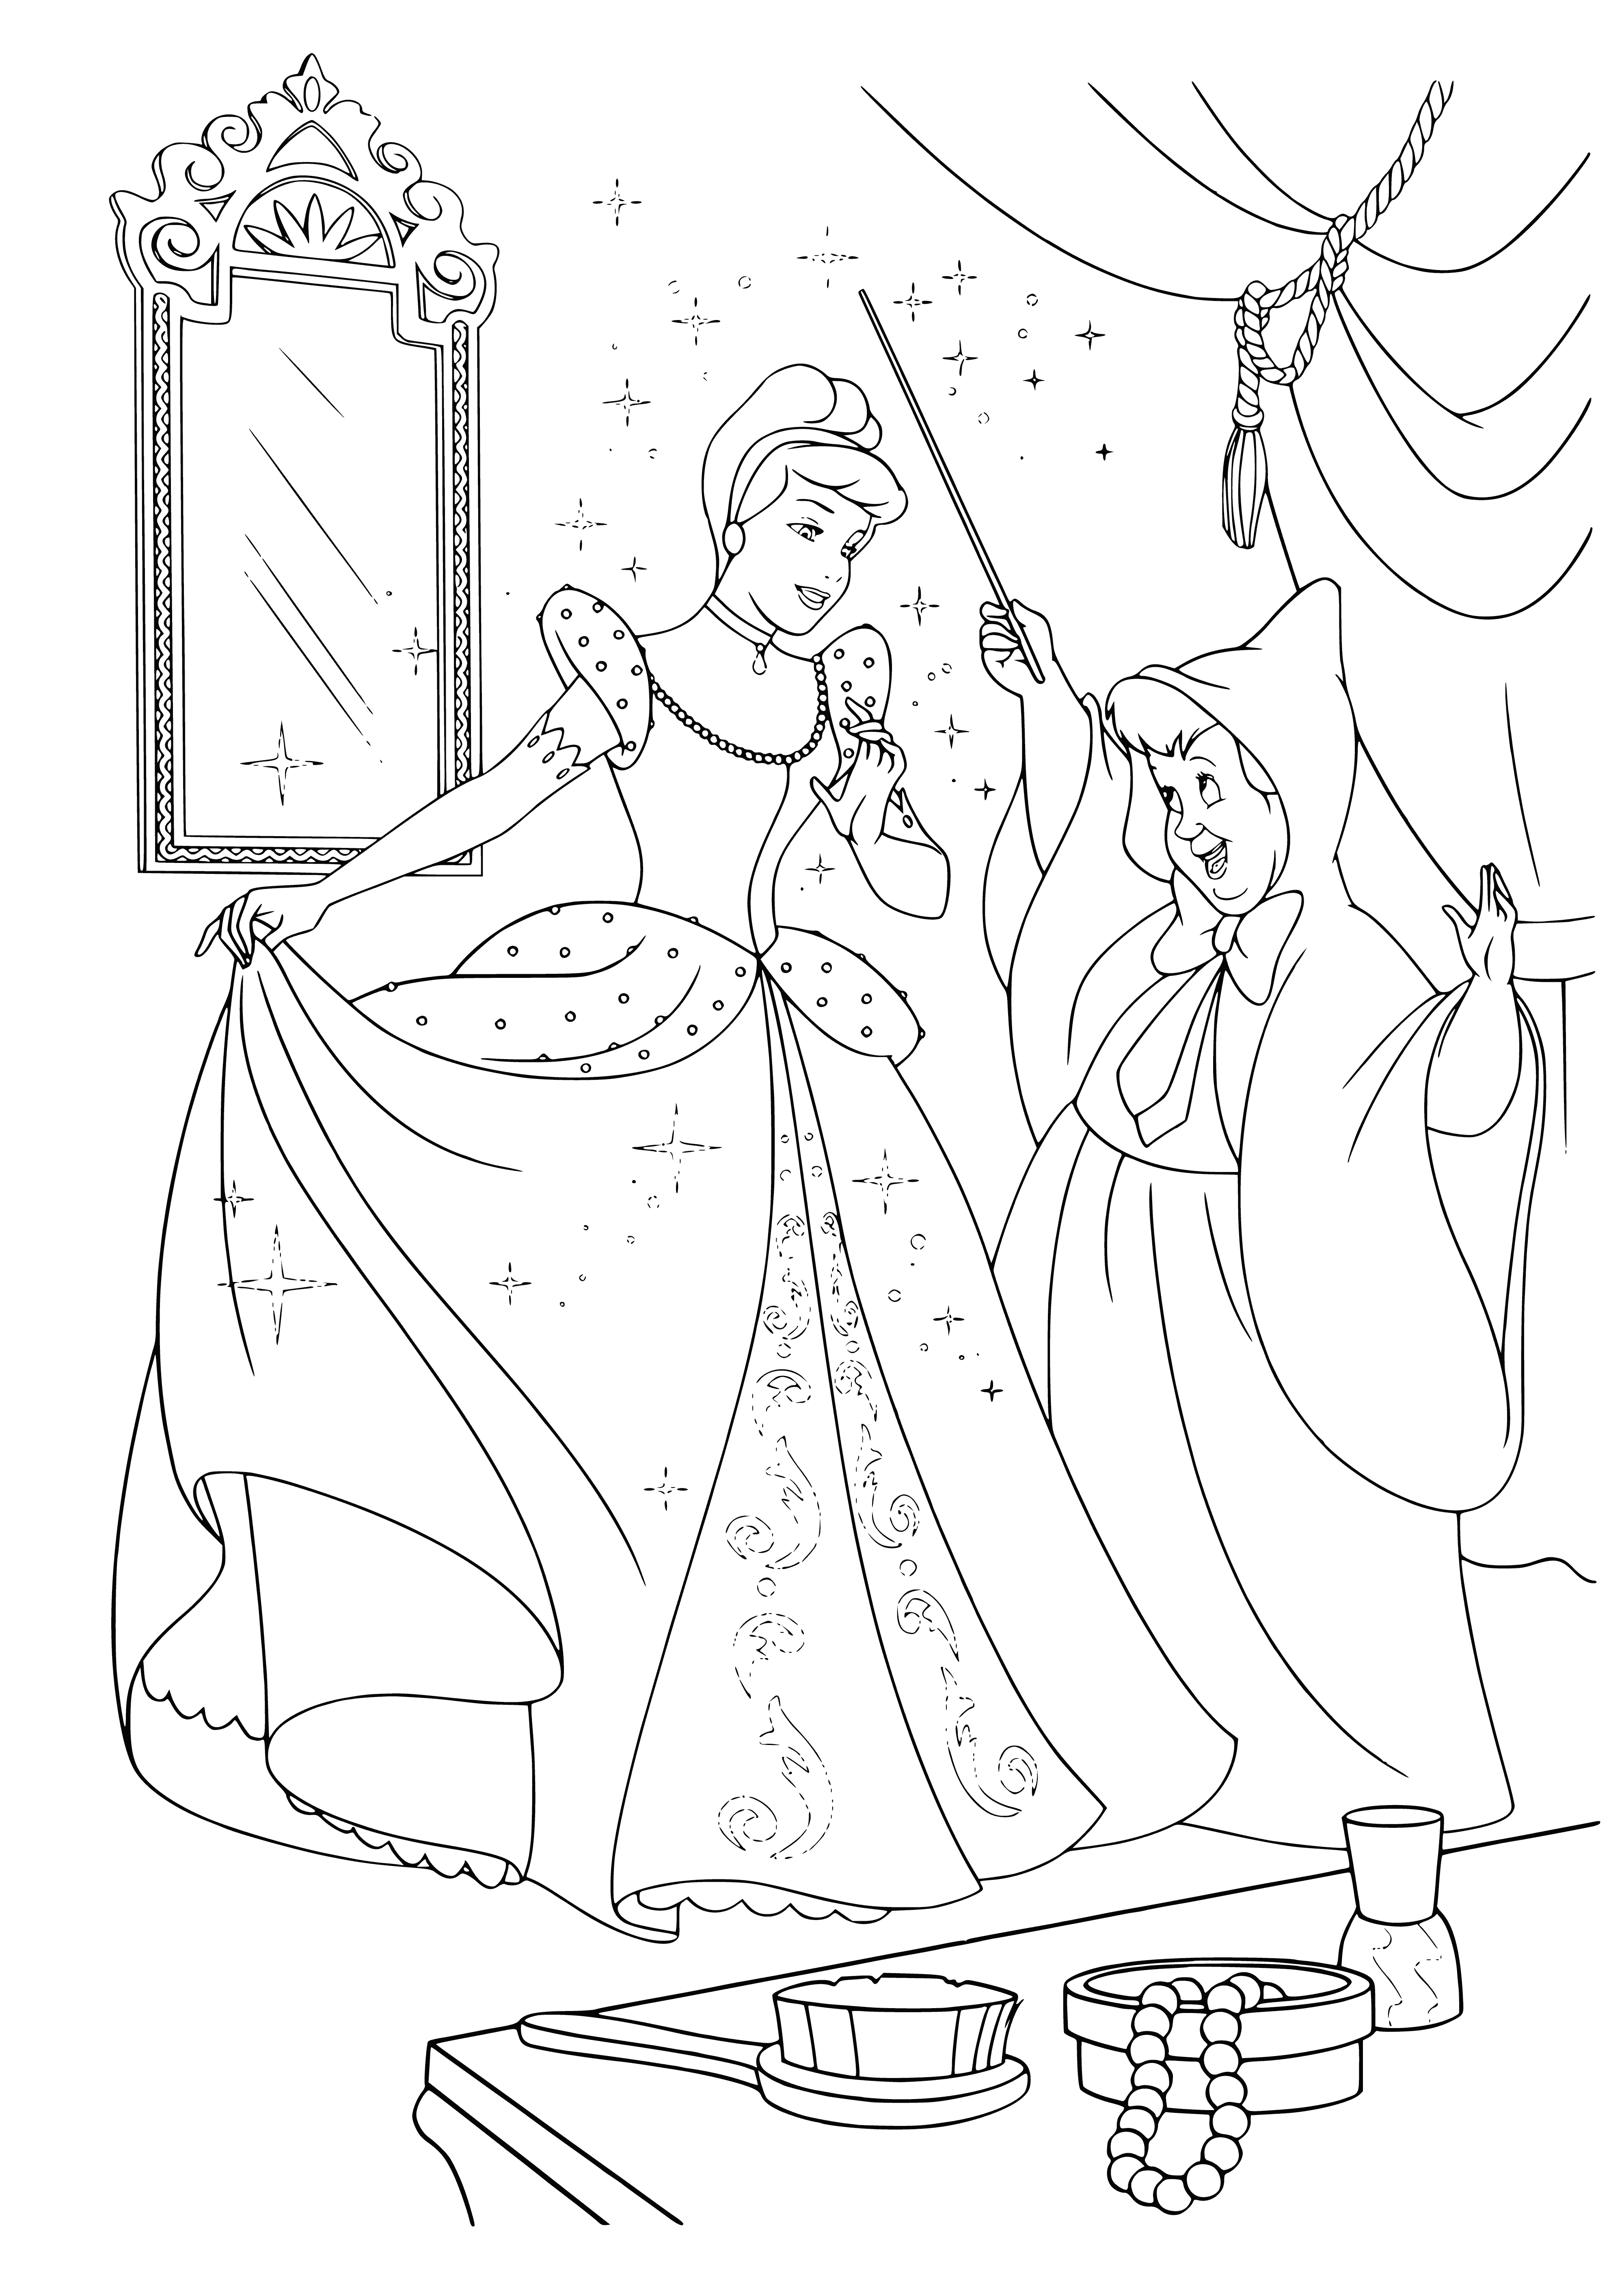 coloring page: Cinderella has a new white dress w/ high neck + light blue skirt & shoes w/ white bow - signature look!